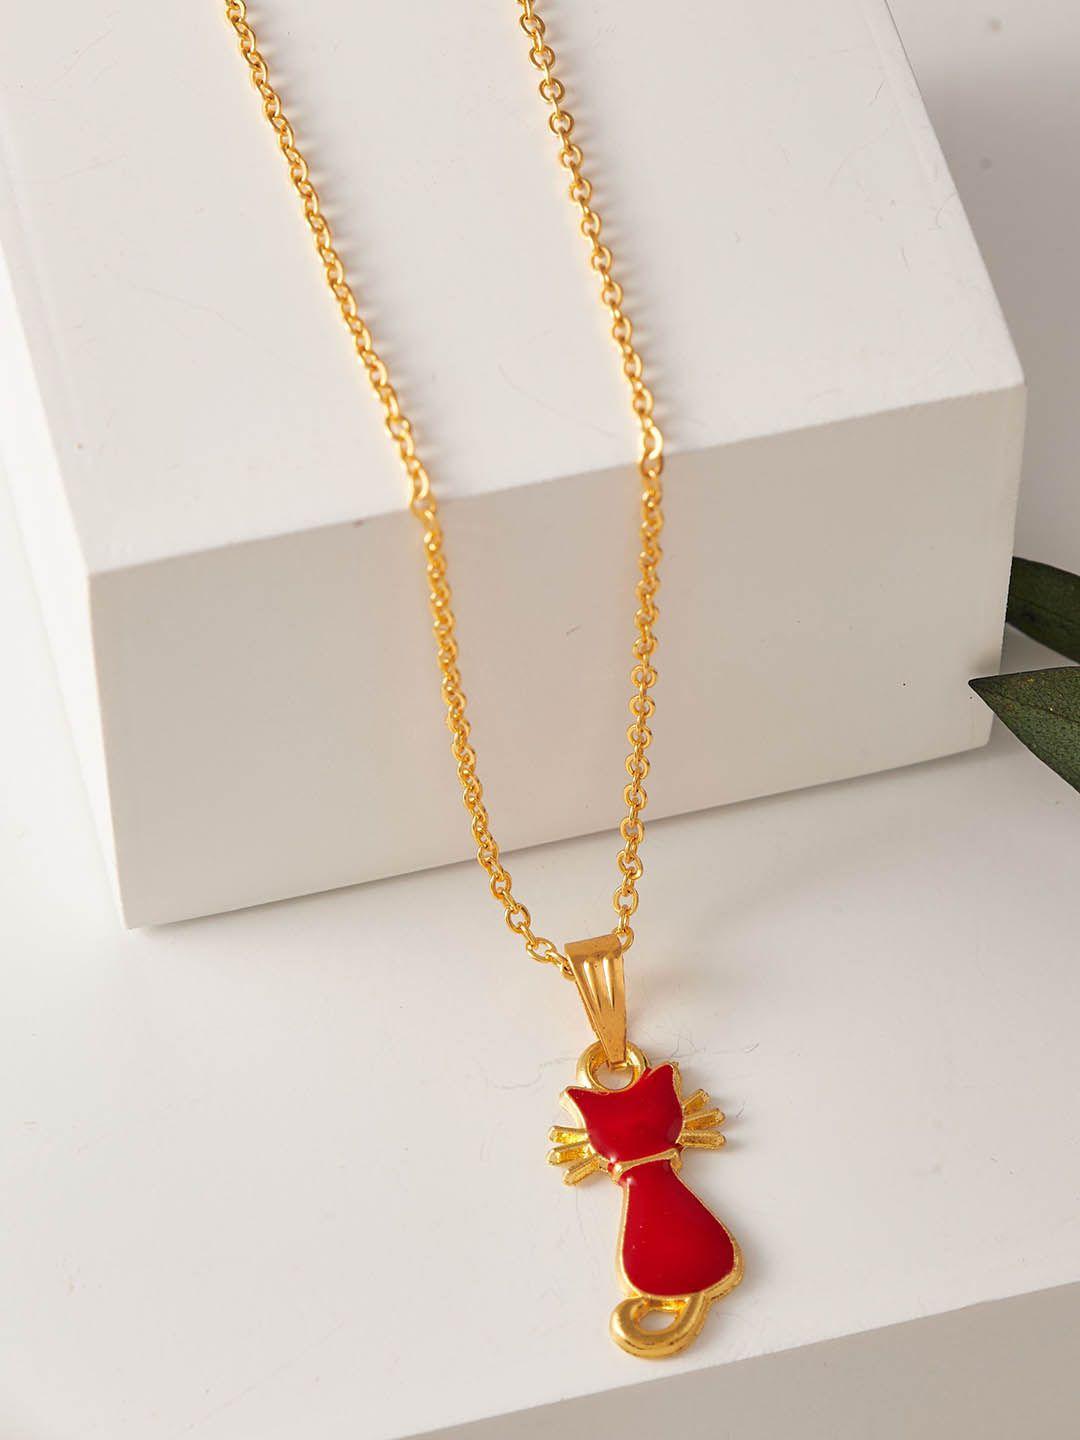 dressberry gold-plated pendant with chain